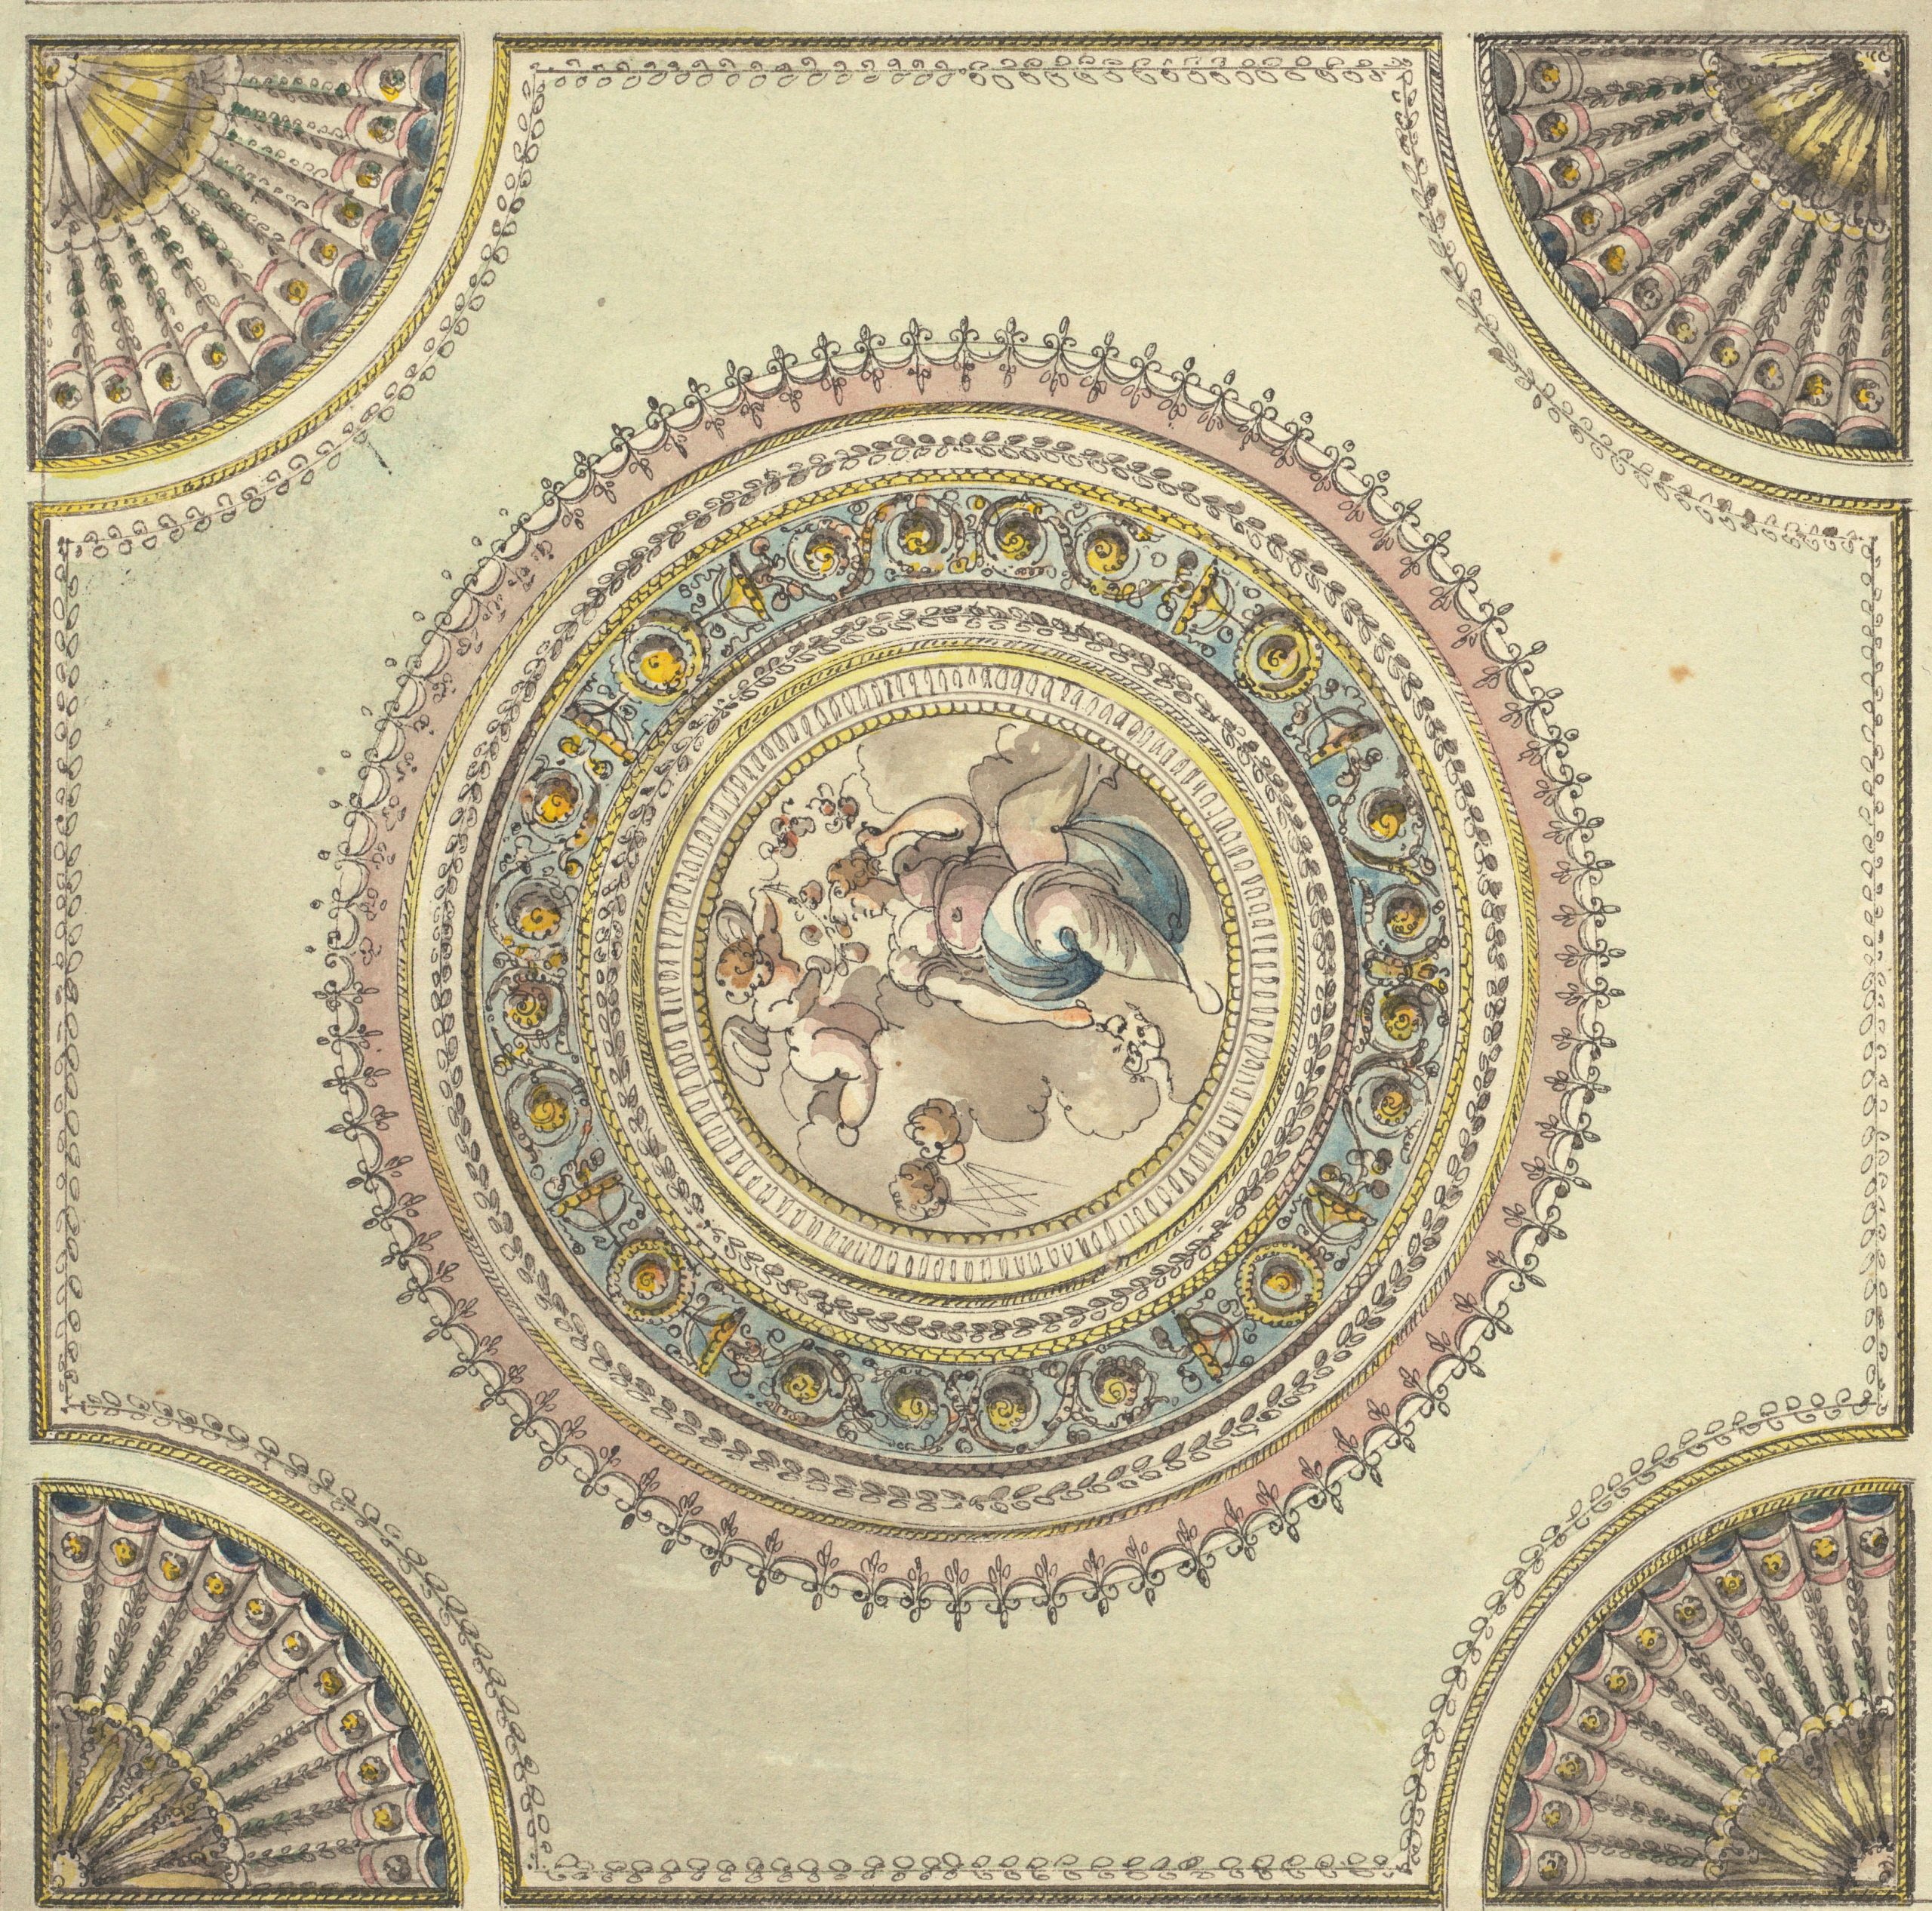 1790-1815_Giacomo Quarenghi_An Ornate Ceiling with an Allegory of Spring_DETAIL 5657-007